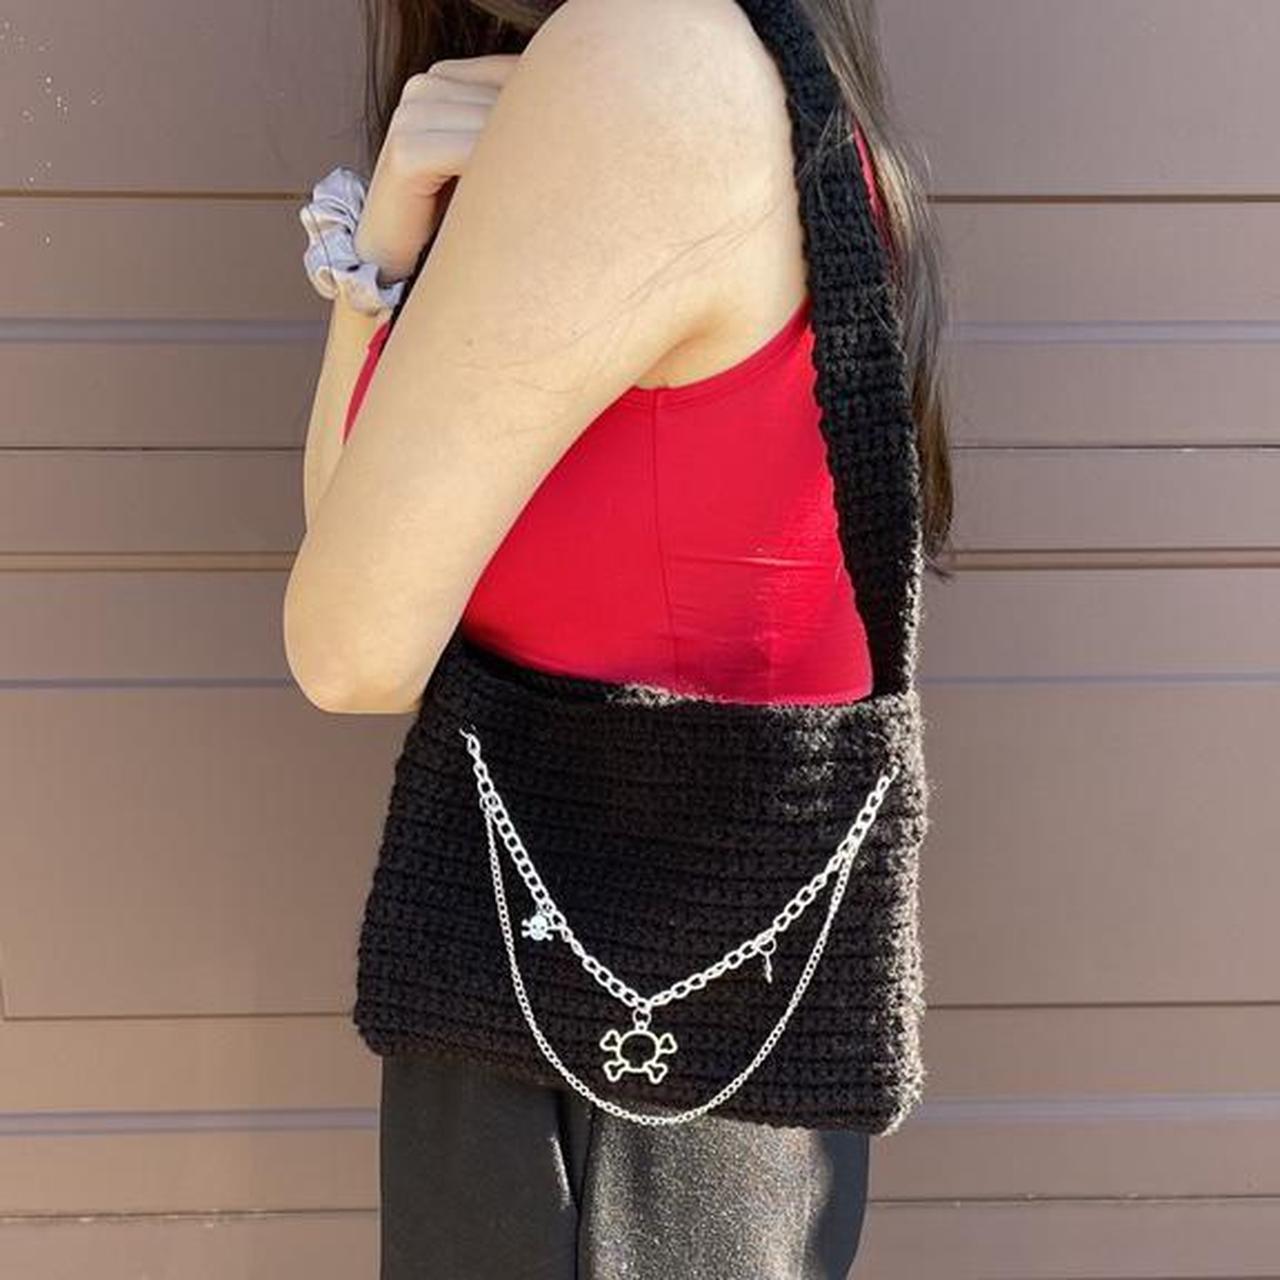 Product Image 1 - -skull crochet bag
-APPROX: 10.5x7.25 inches